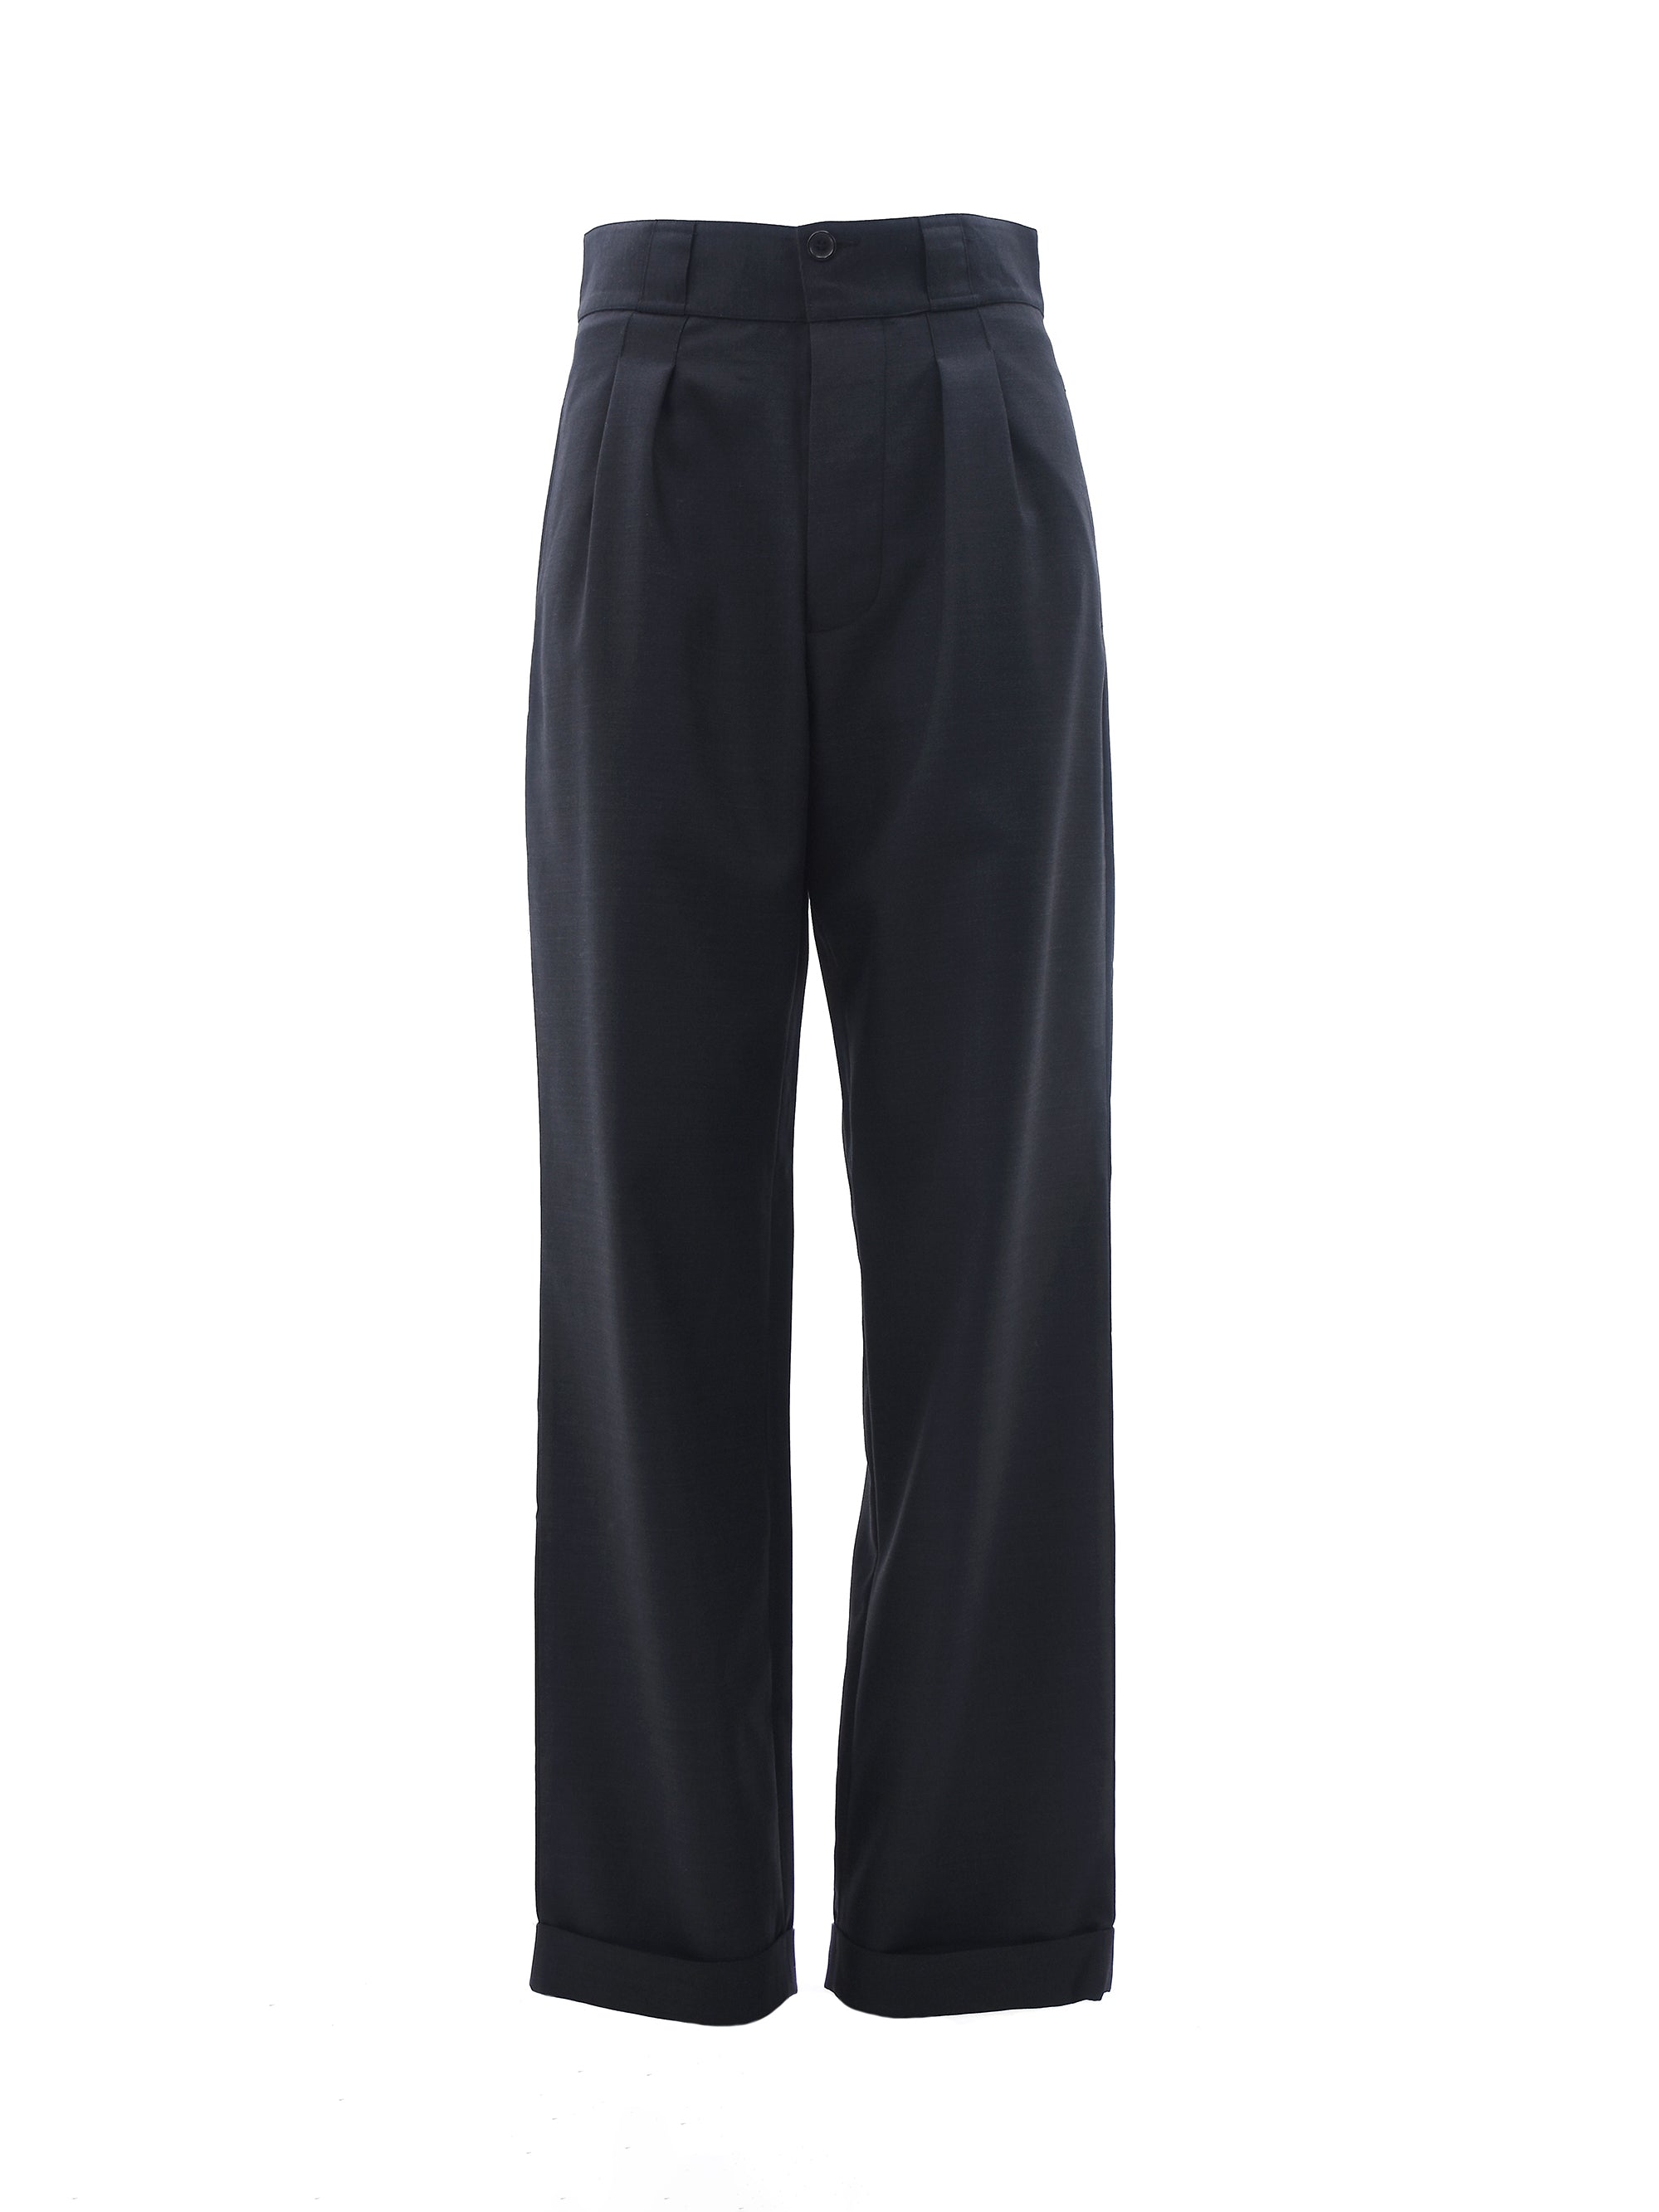 CHARCOAL WOOL PLEATED SUIT TROUSERS